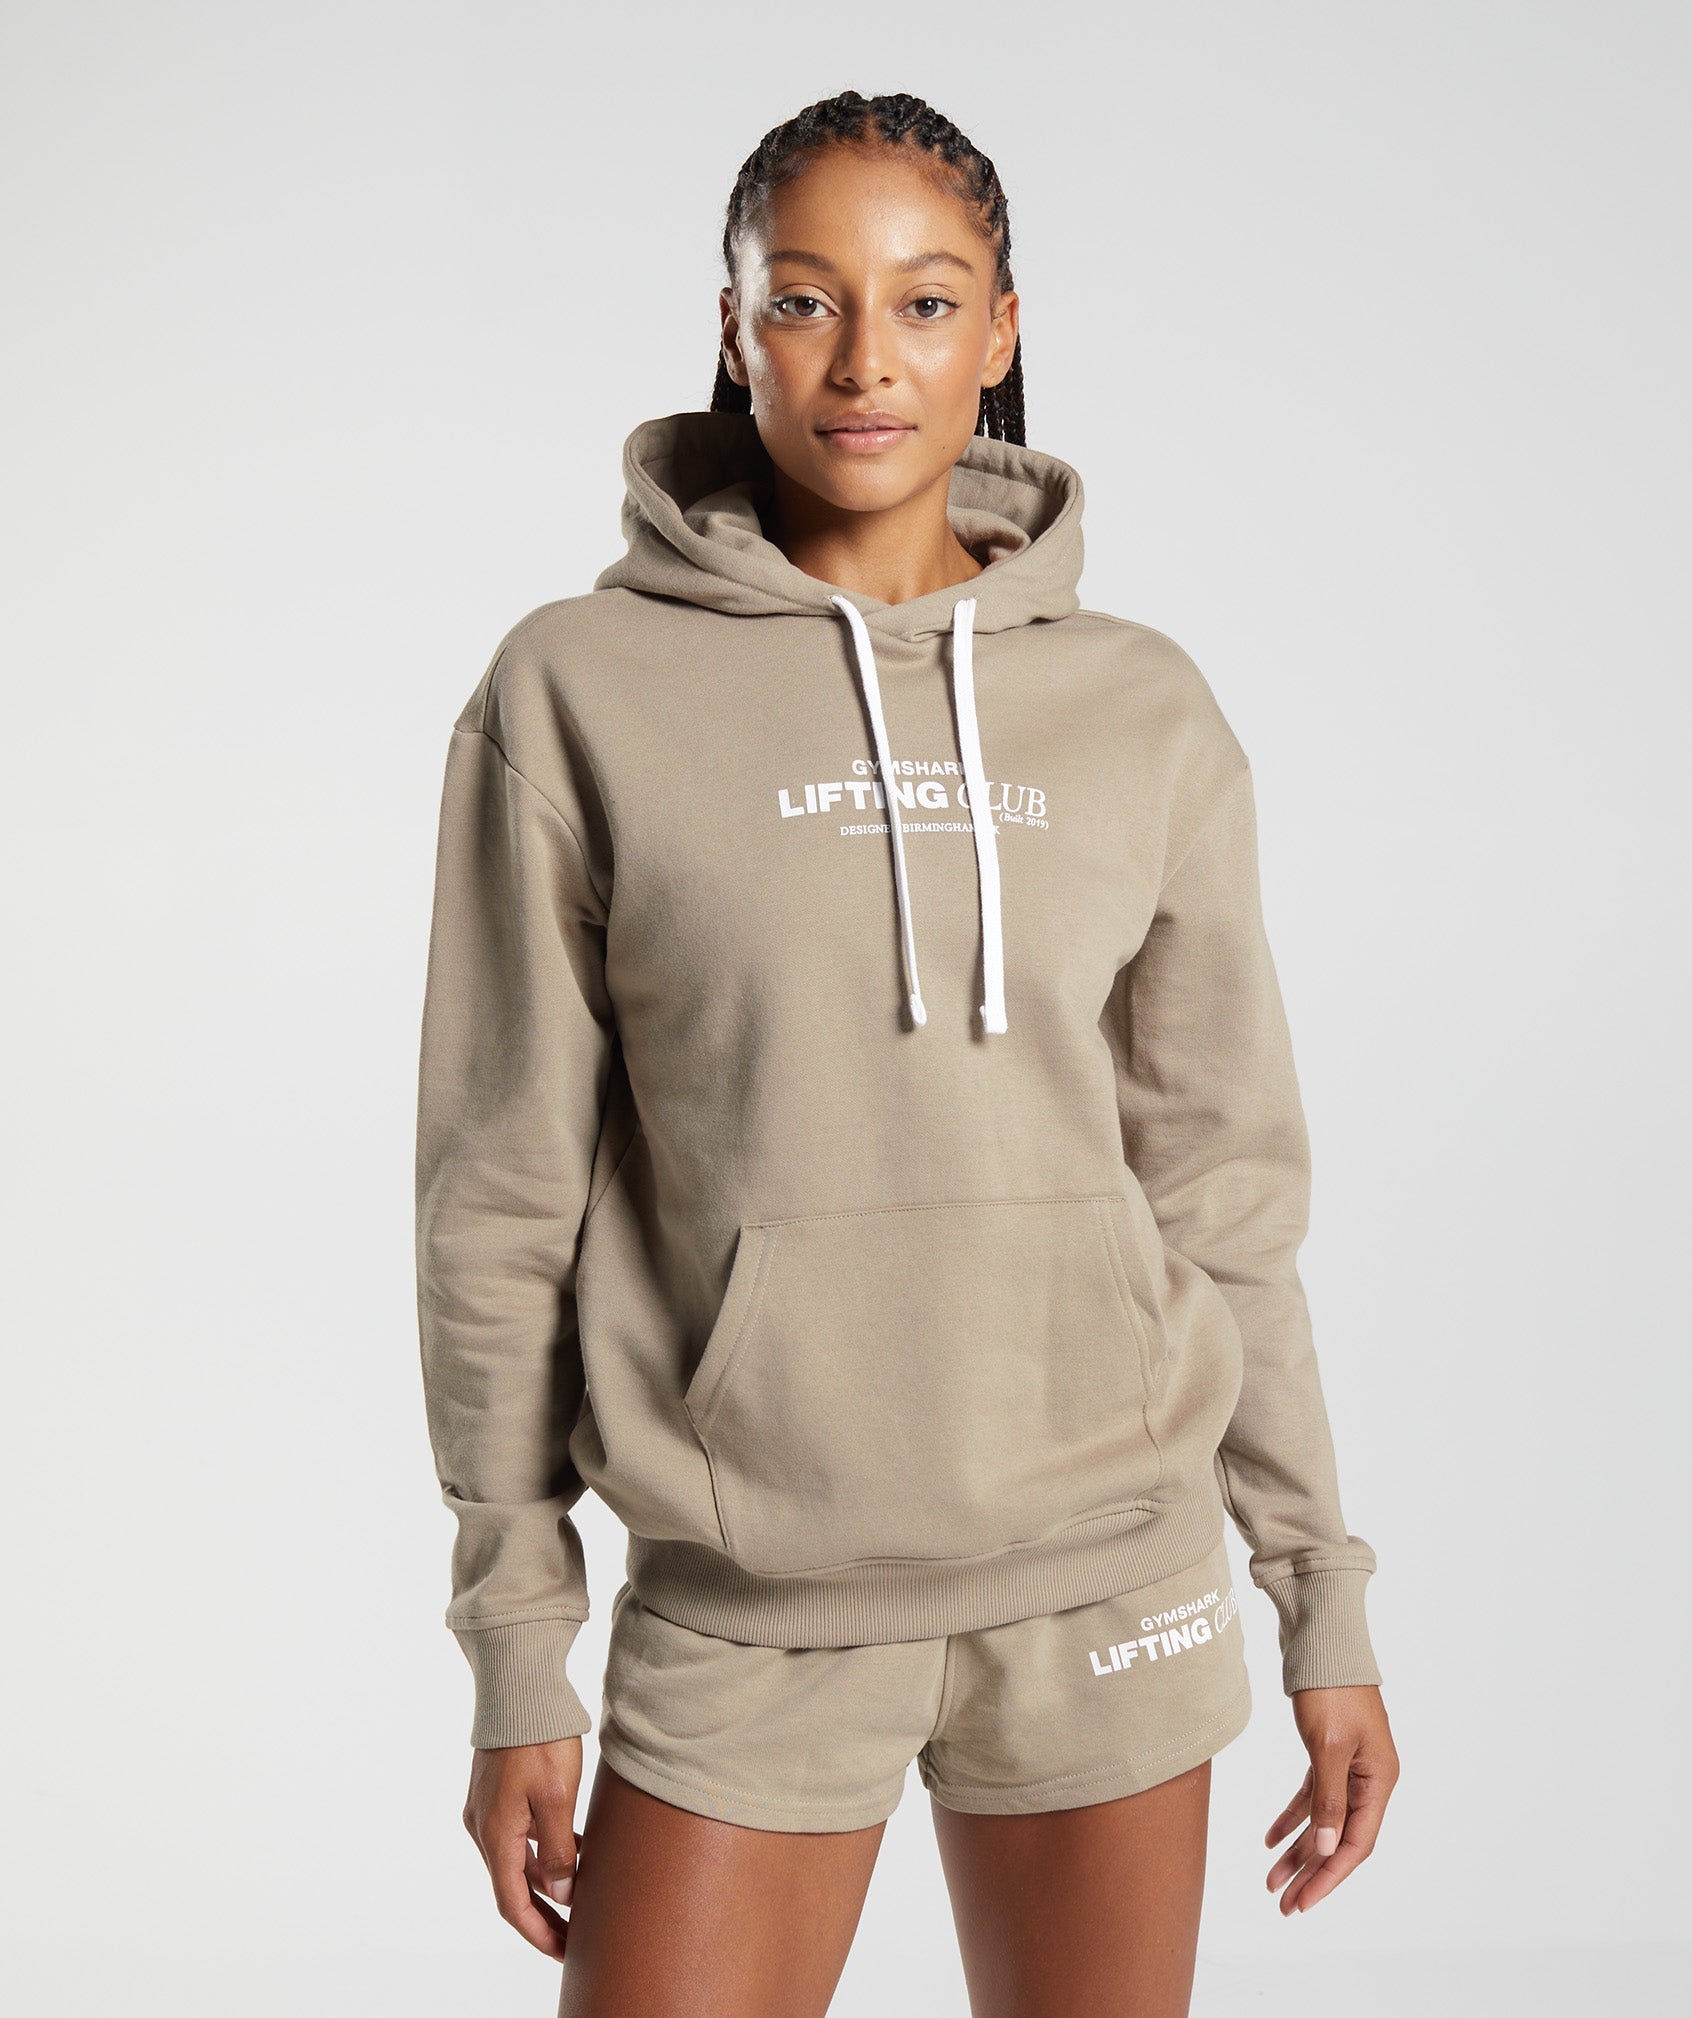 http://cdn.shopify.com/s/files/1/2446/8477/products/SocialClubOversizedHoodie-CementBrownB4A6I-NBH2.1148.85.jpg?v=1668423759